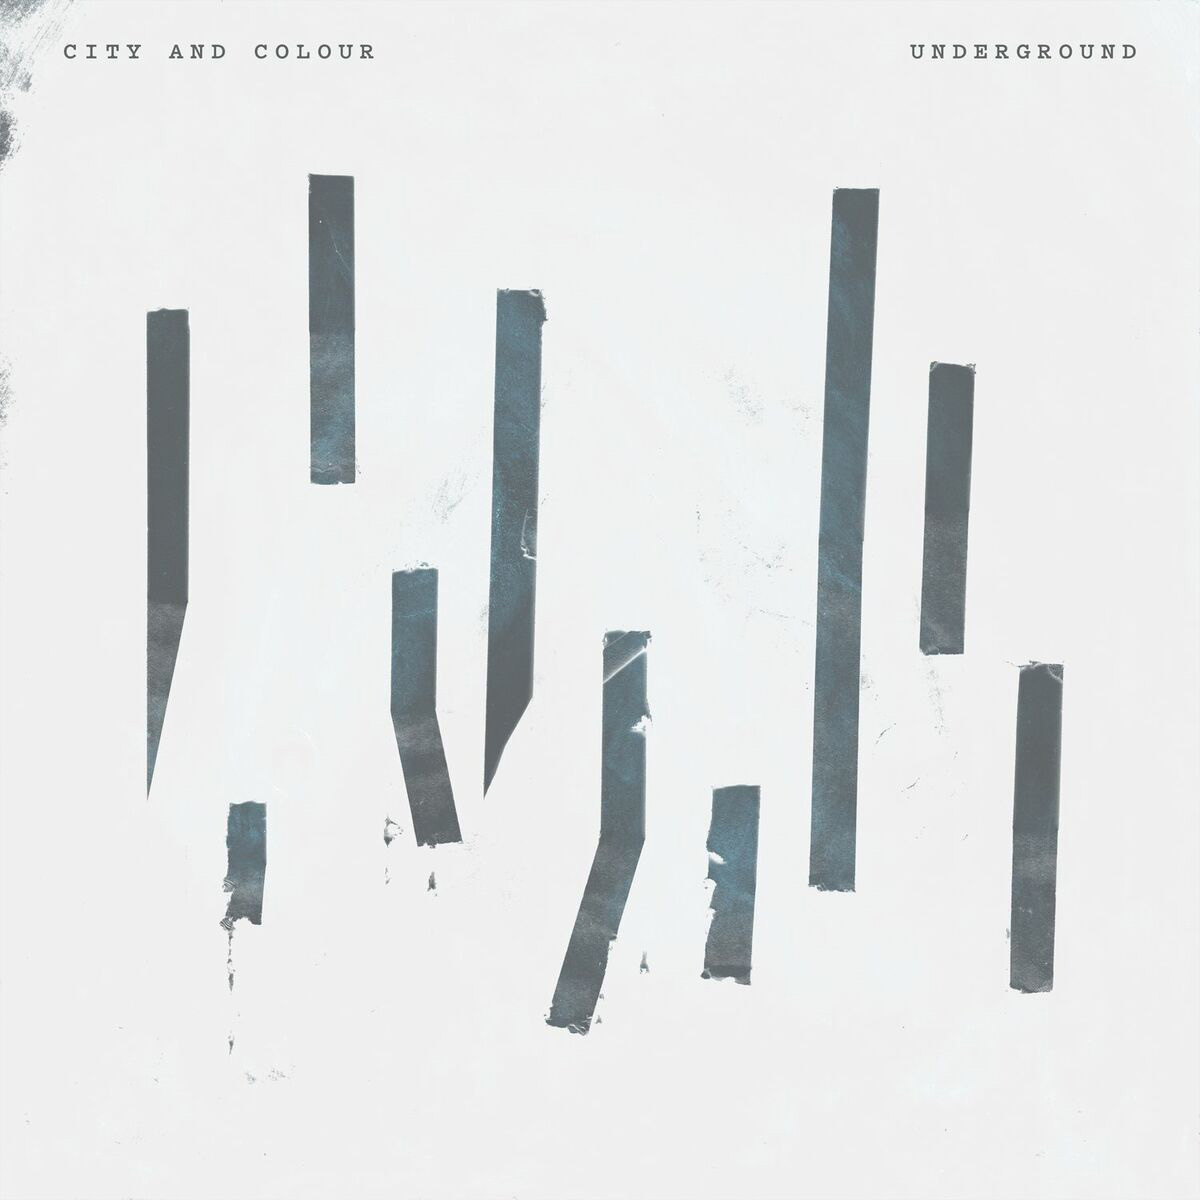 Discographie - City and Colour - Dallas Green - Underground